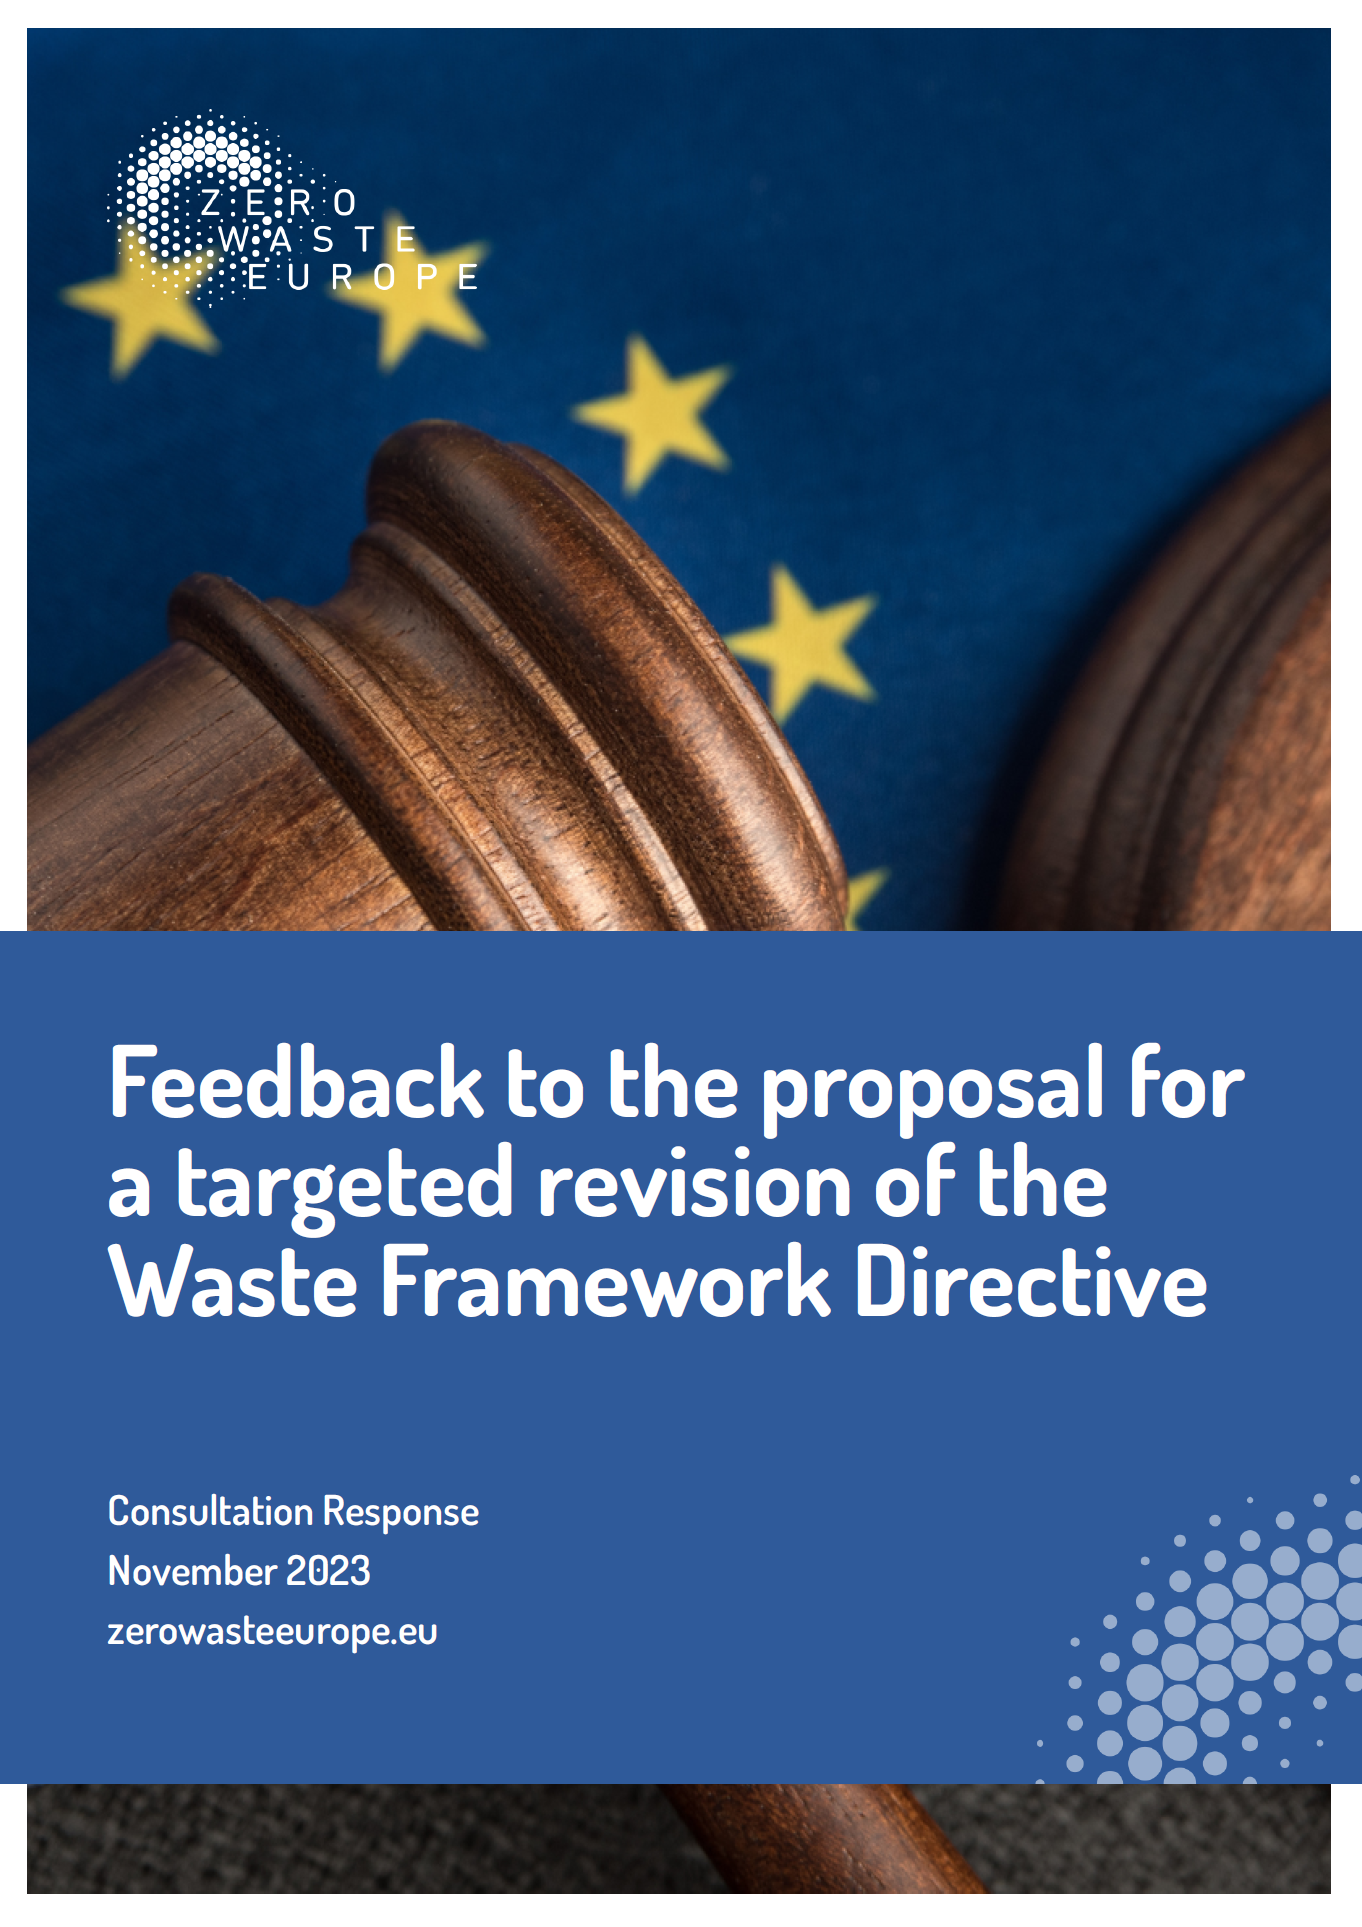 Feedback to the proposal for a targeted revision of the Waste Framework Directive